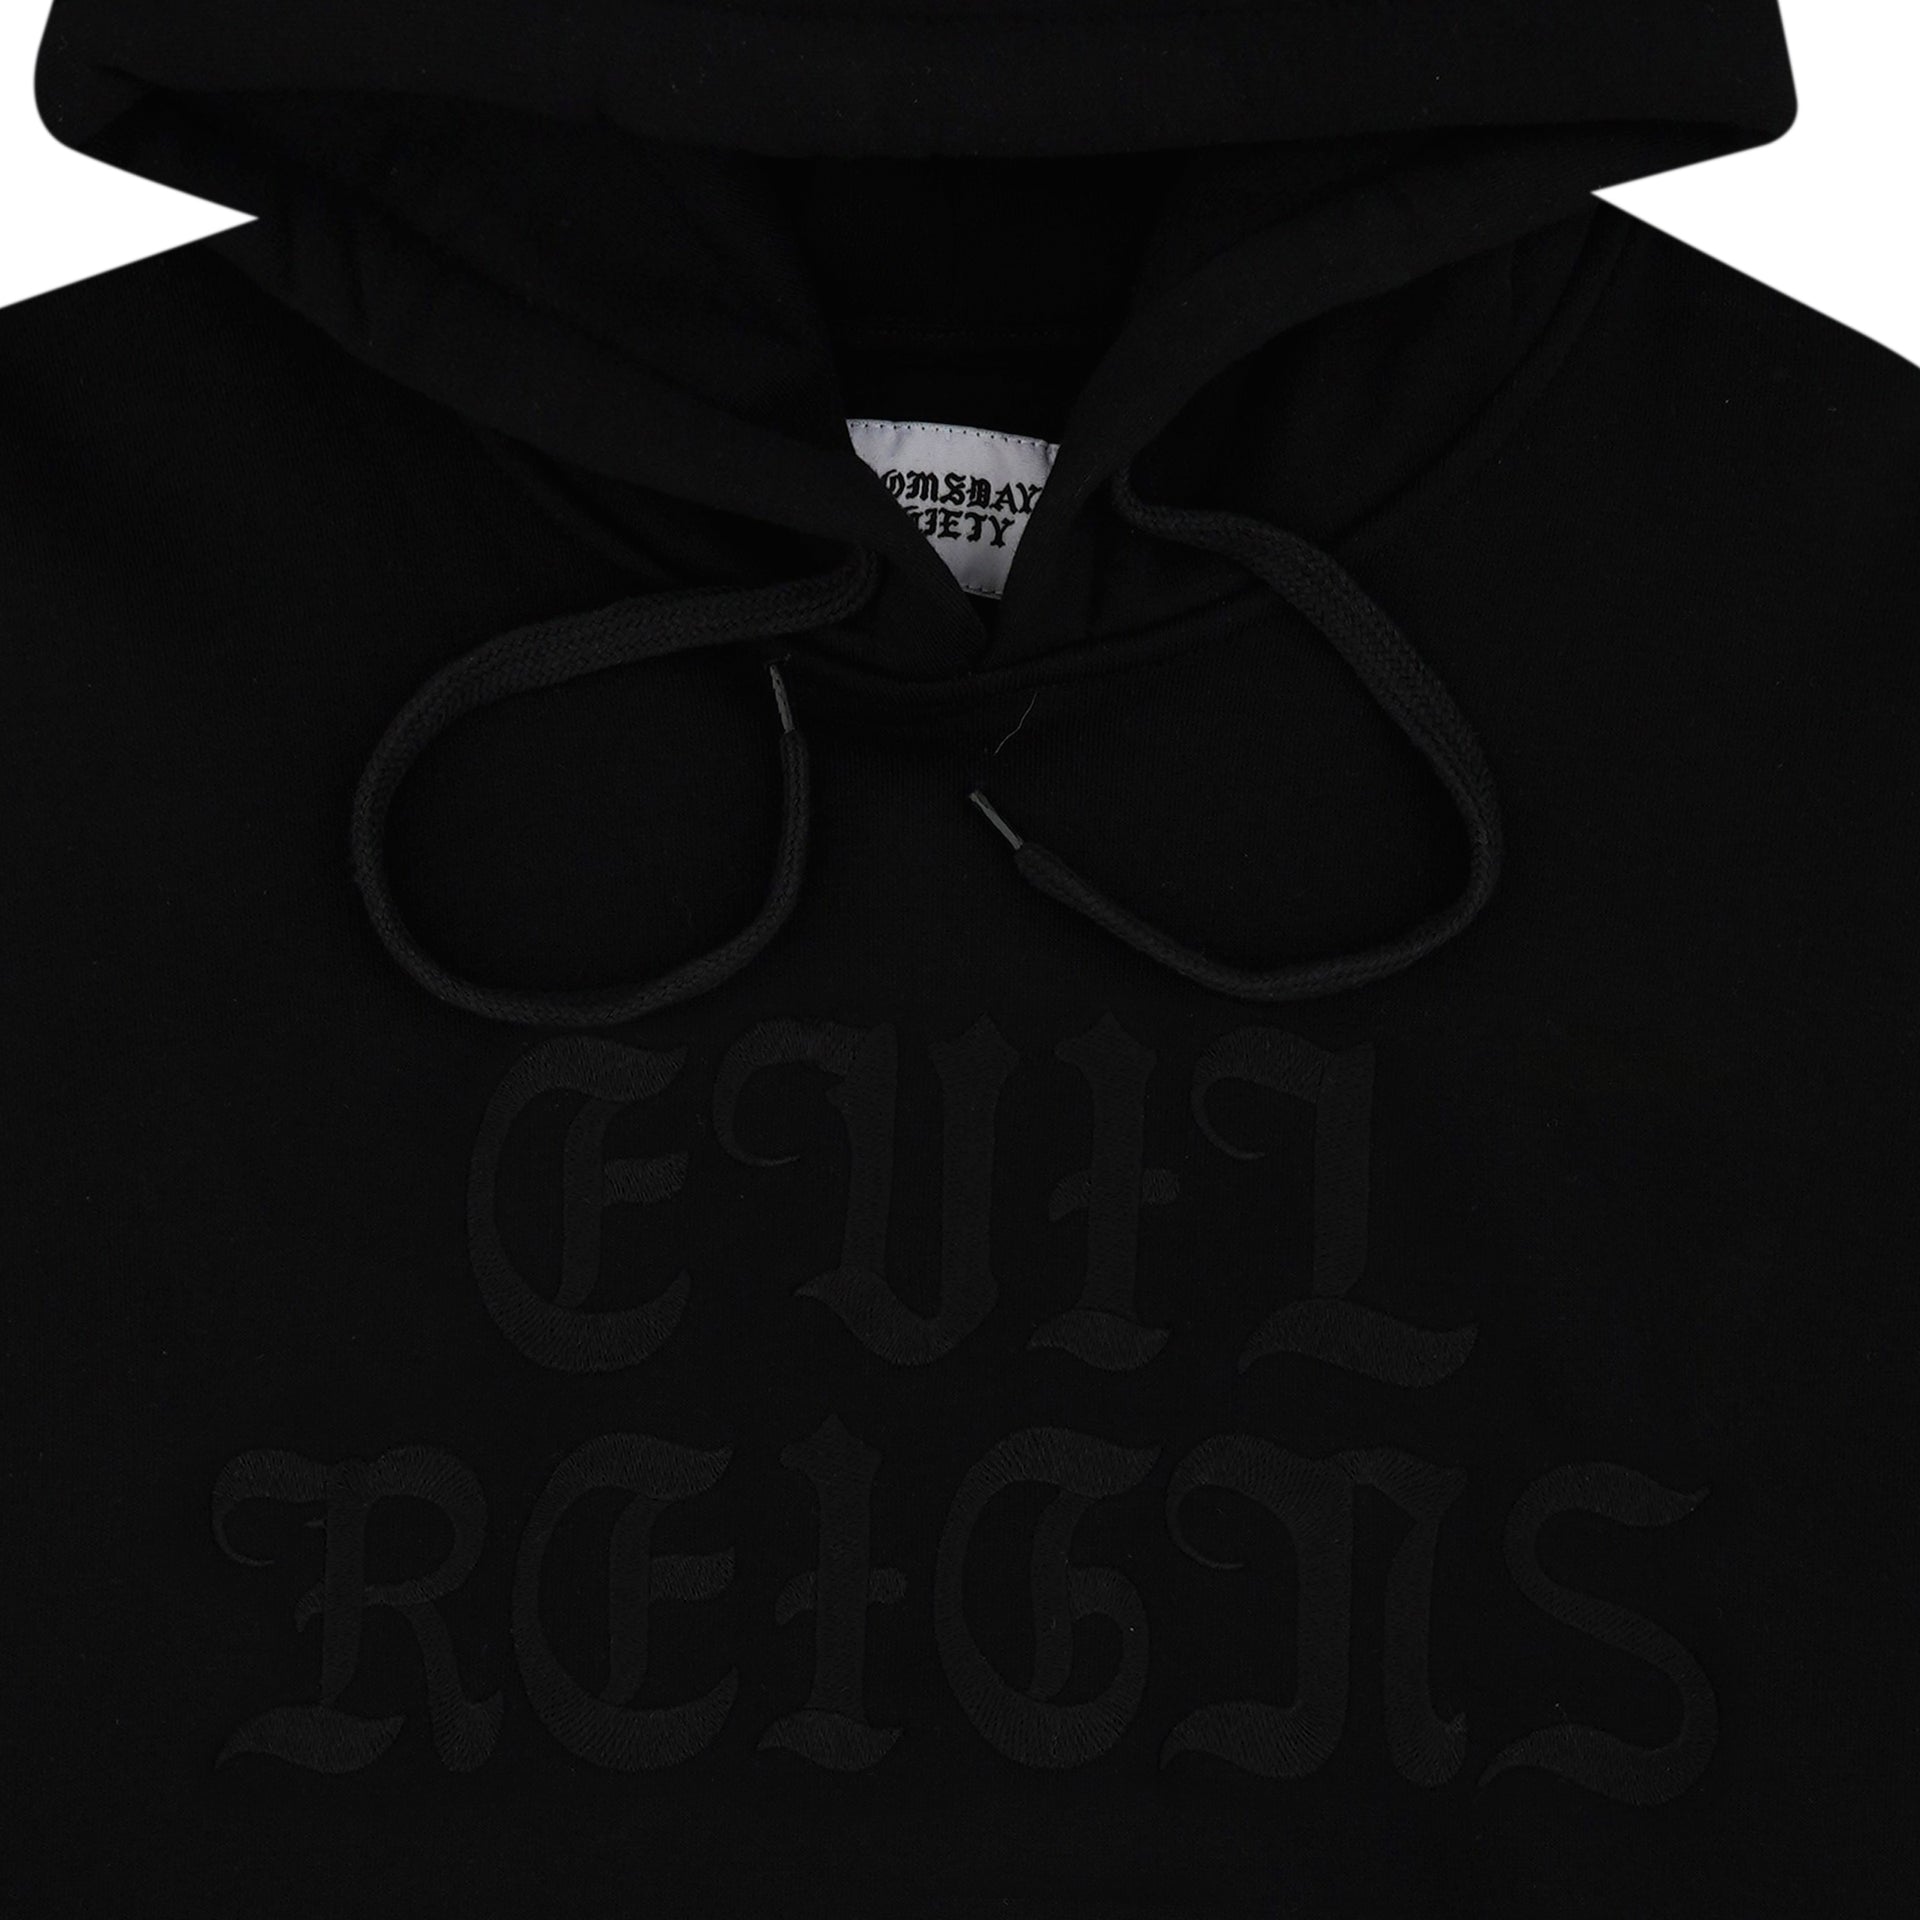 EVIL REIGNS EMBROIDERED HOODIE